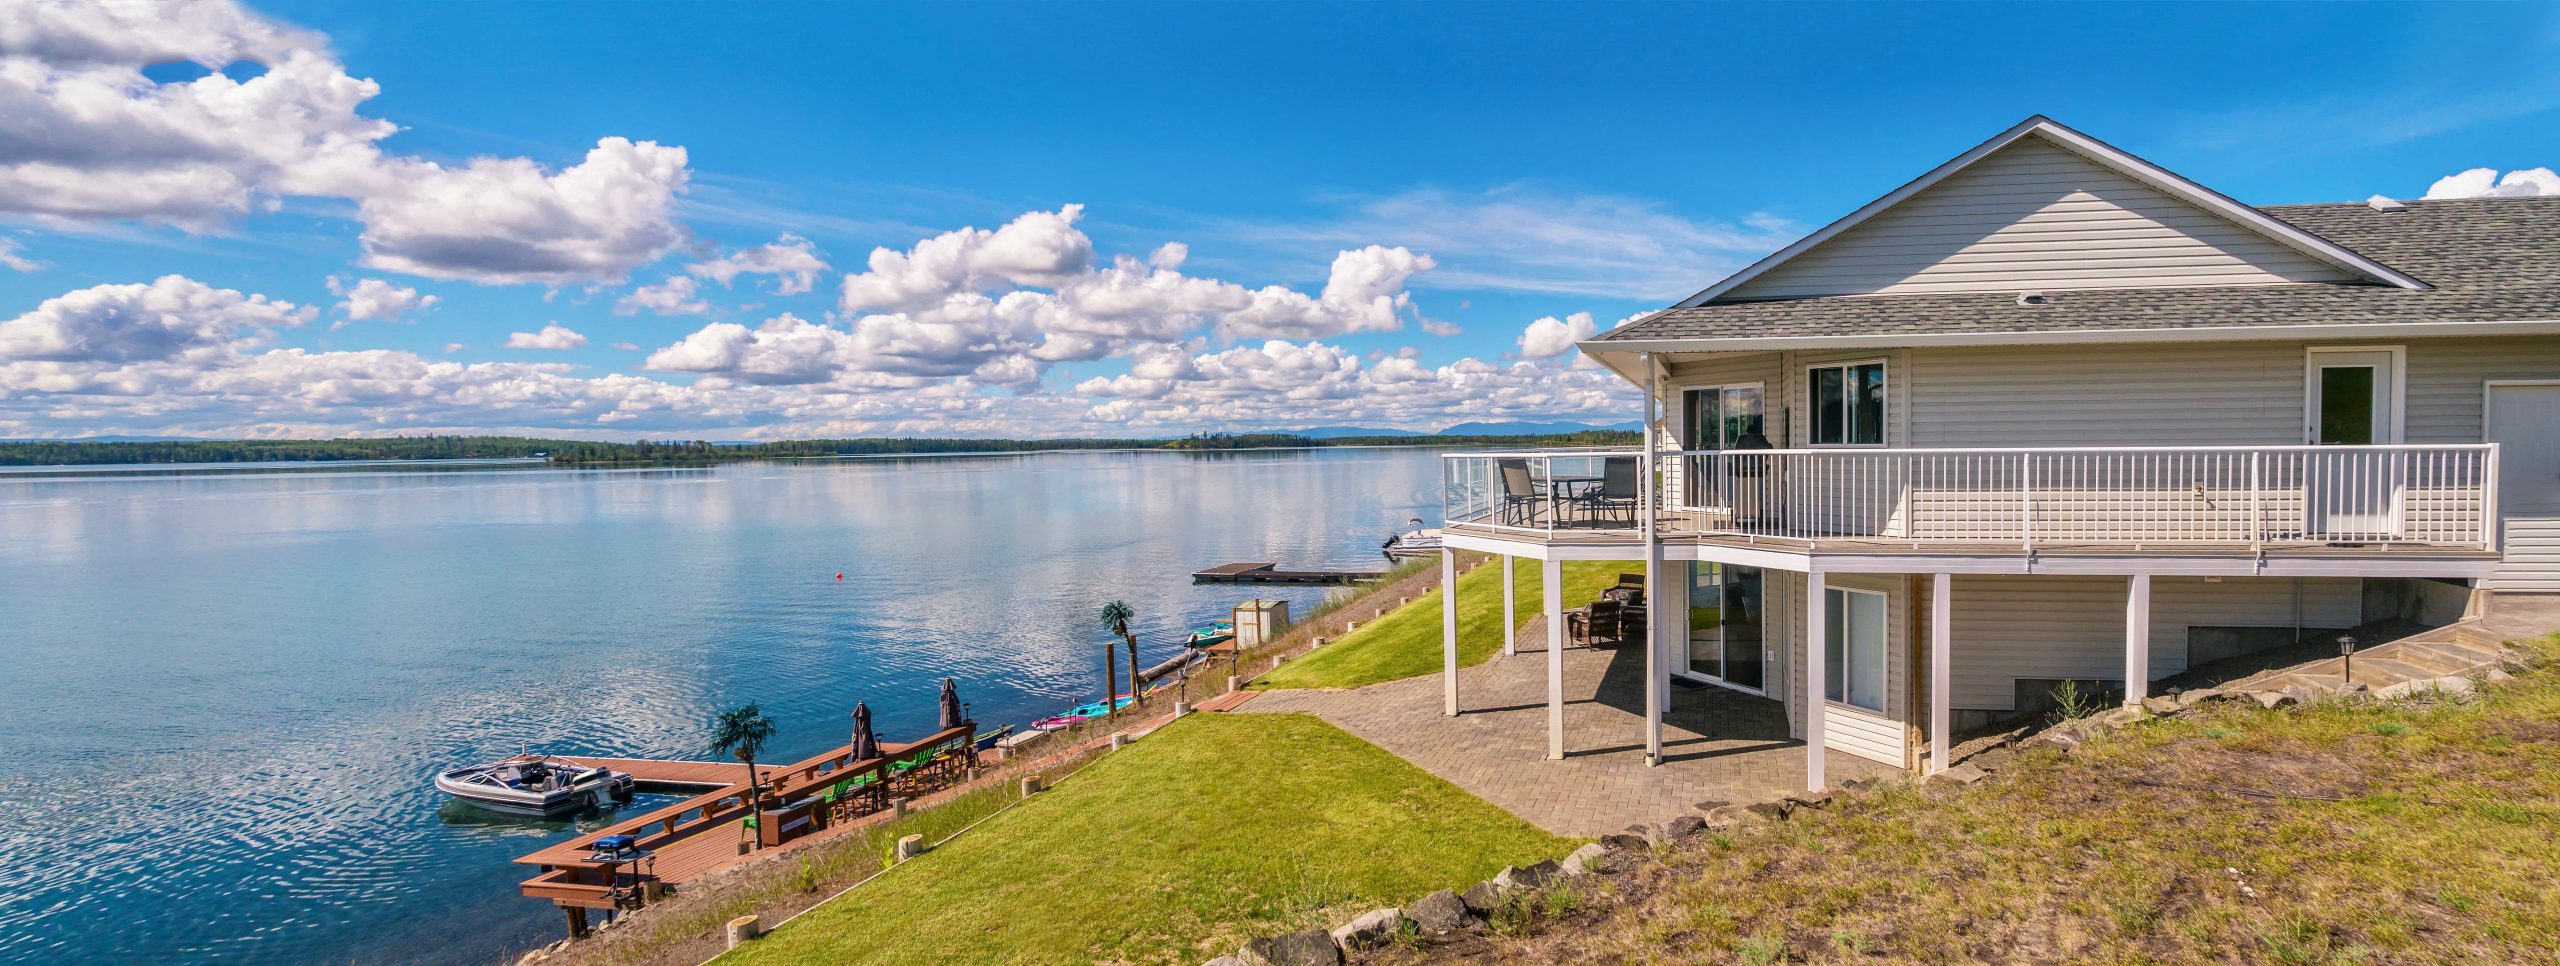 Waterfront property in BC, Canada